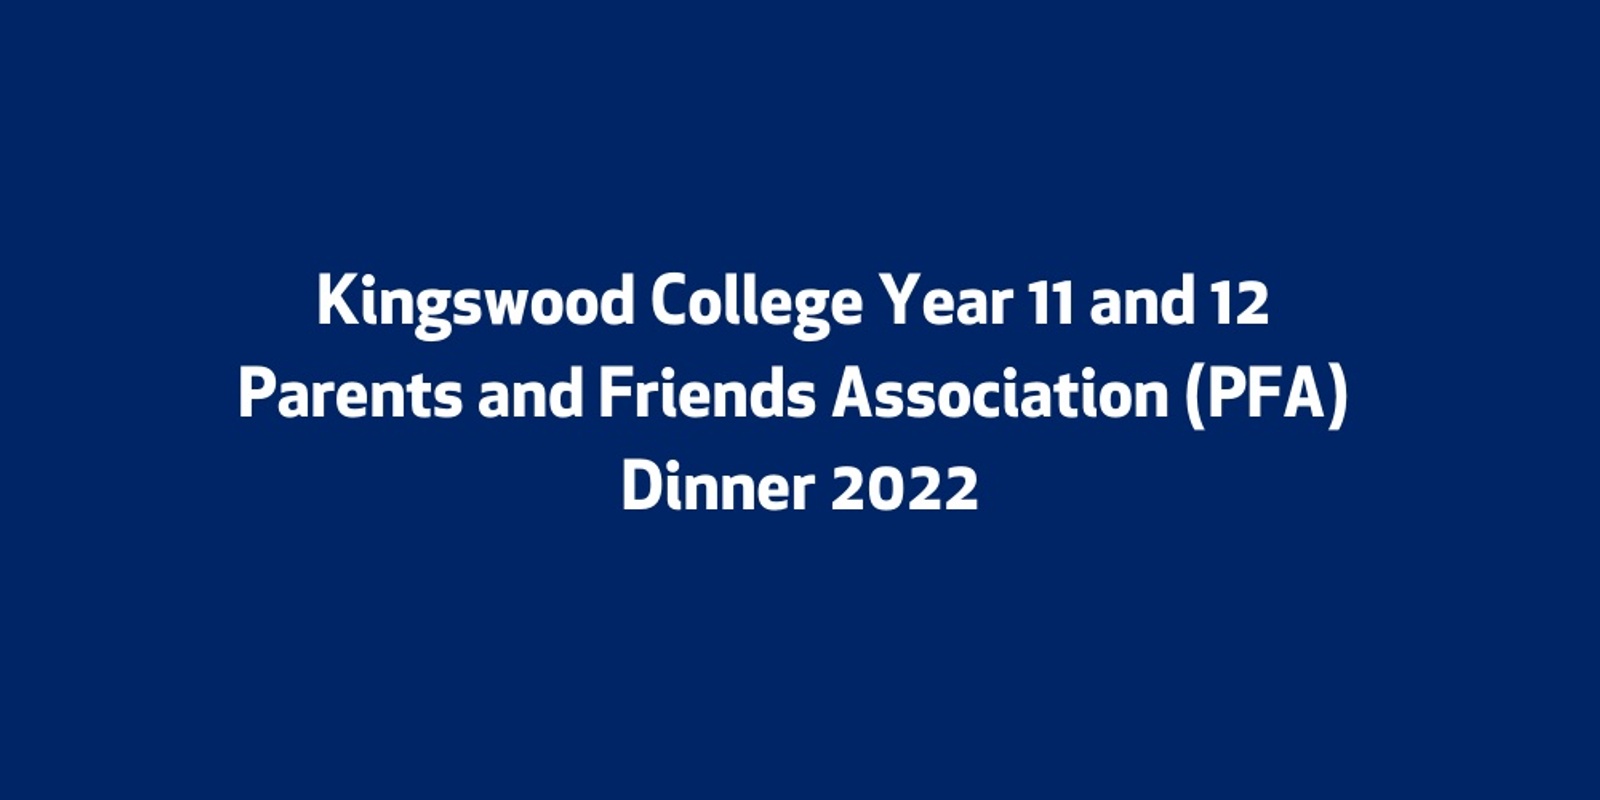 Banner image for Year 11 and Year 12 Parents and Friends Association (PFA) Dinner